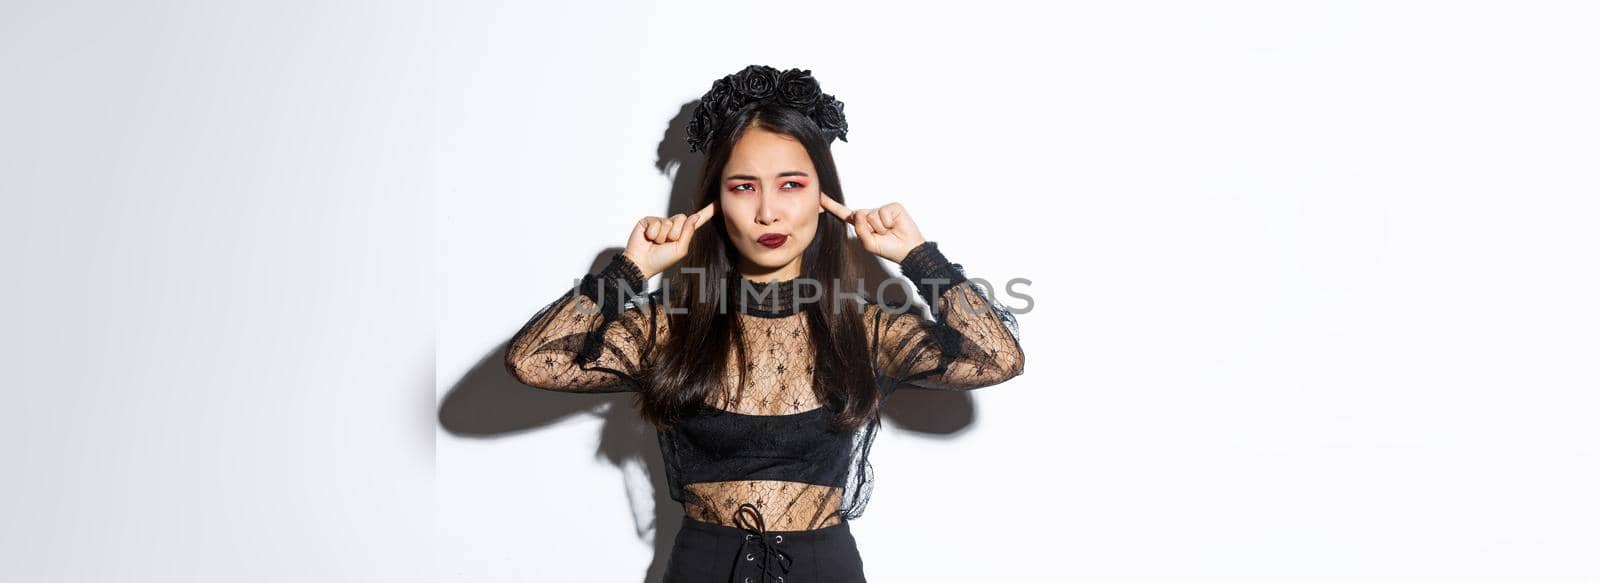 Annoyed and bothered asian stylish woman in halloween costume complaining on something loud, looking left displeased, shut ears with fingers, standing in gothic lace dress over white background.